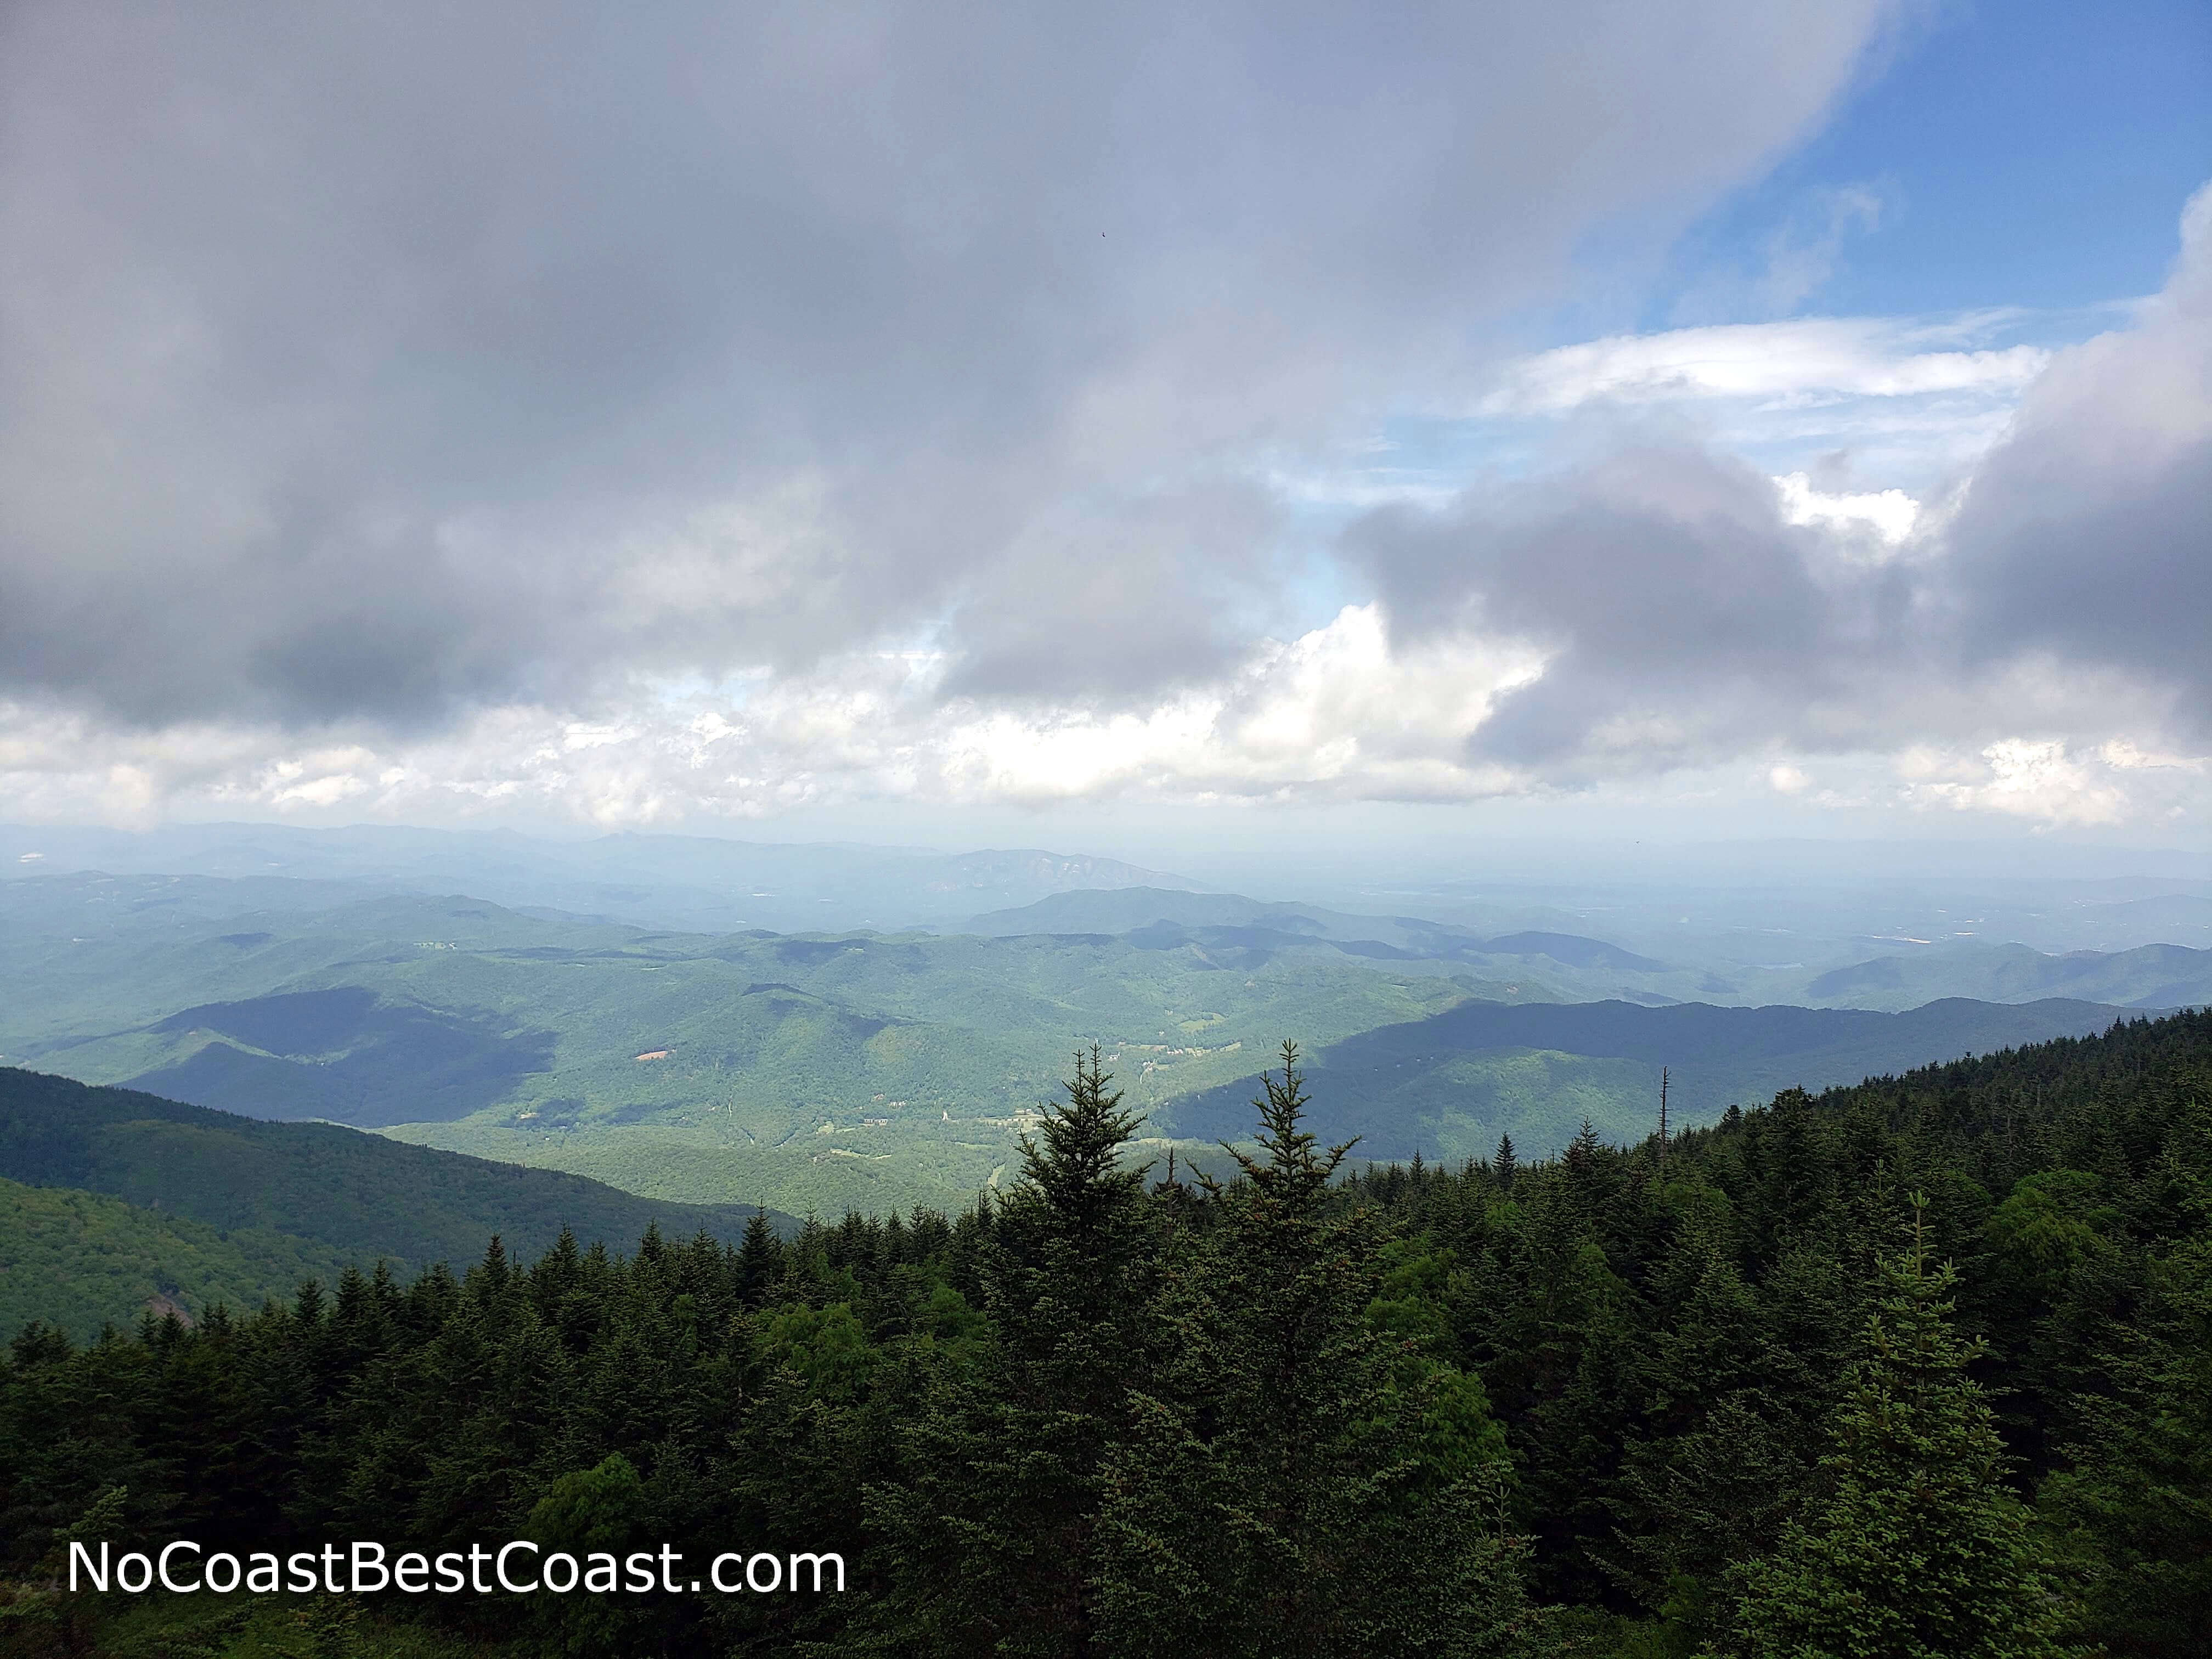 The view to the north from the summit of Mount Mitchell